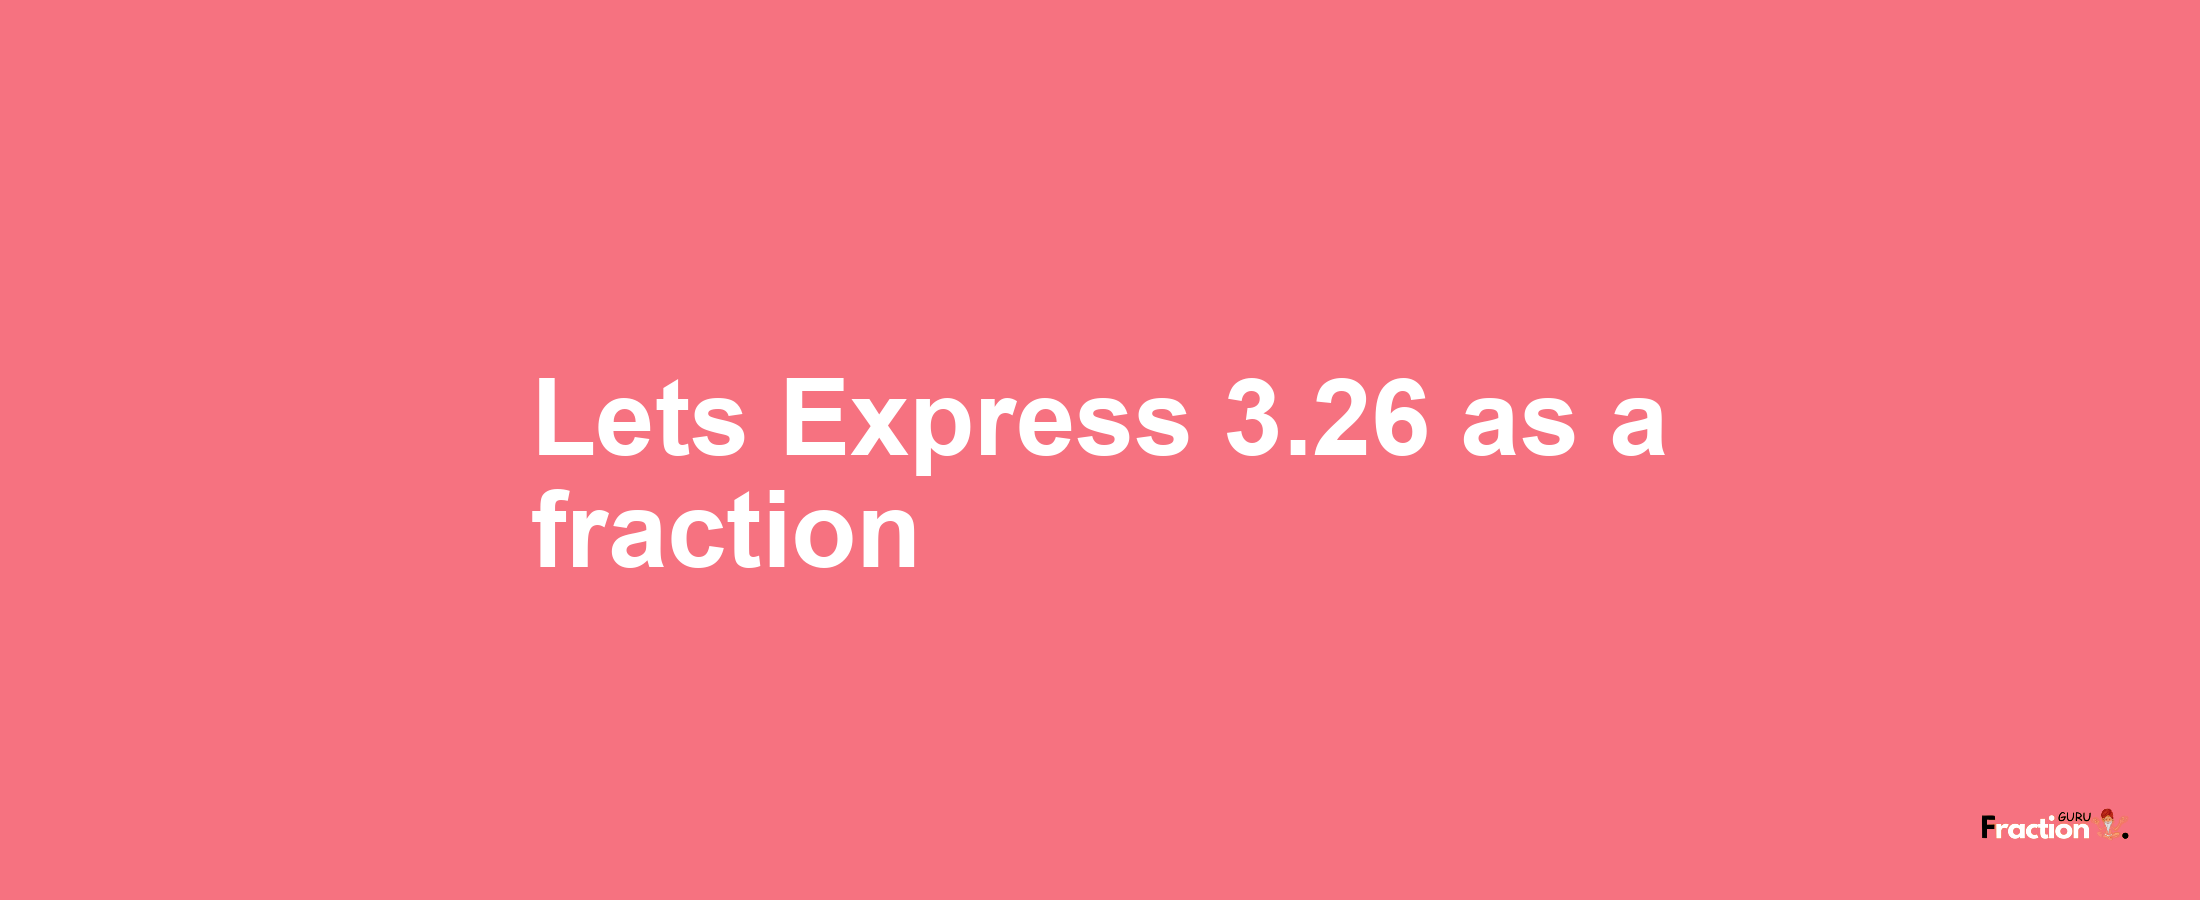 Lets Express 3.26 as afraction